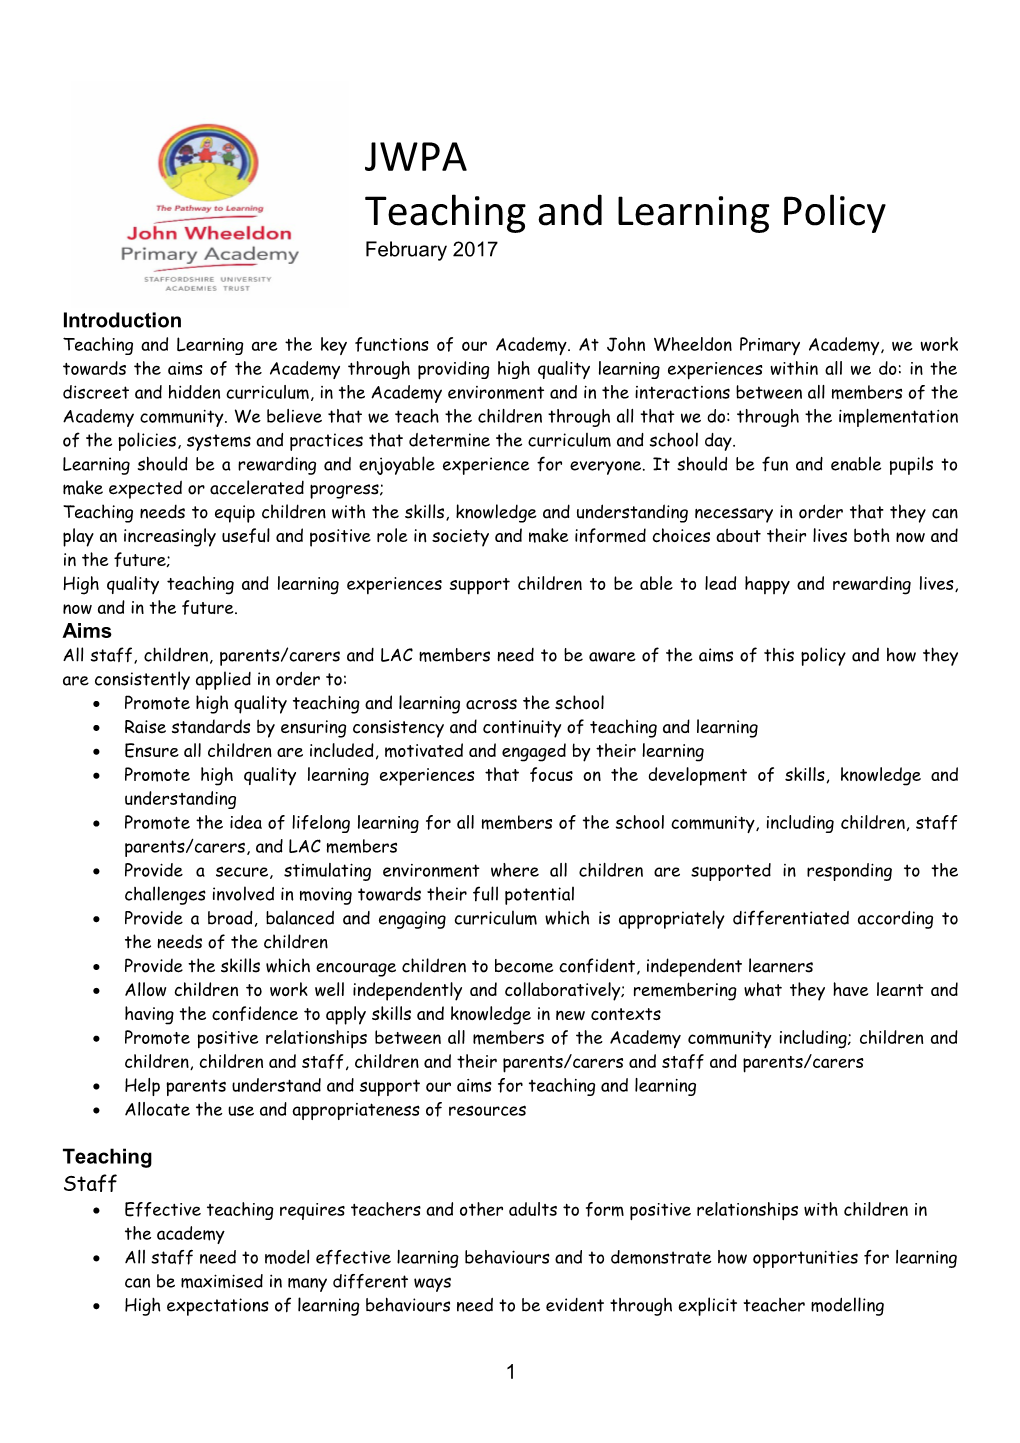 Teaching and Learning Policy s4